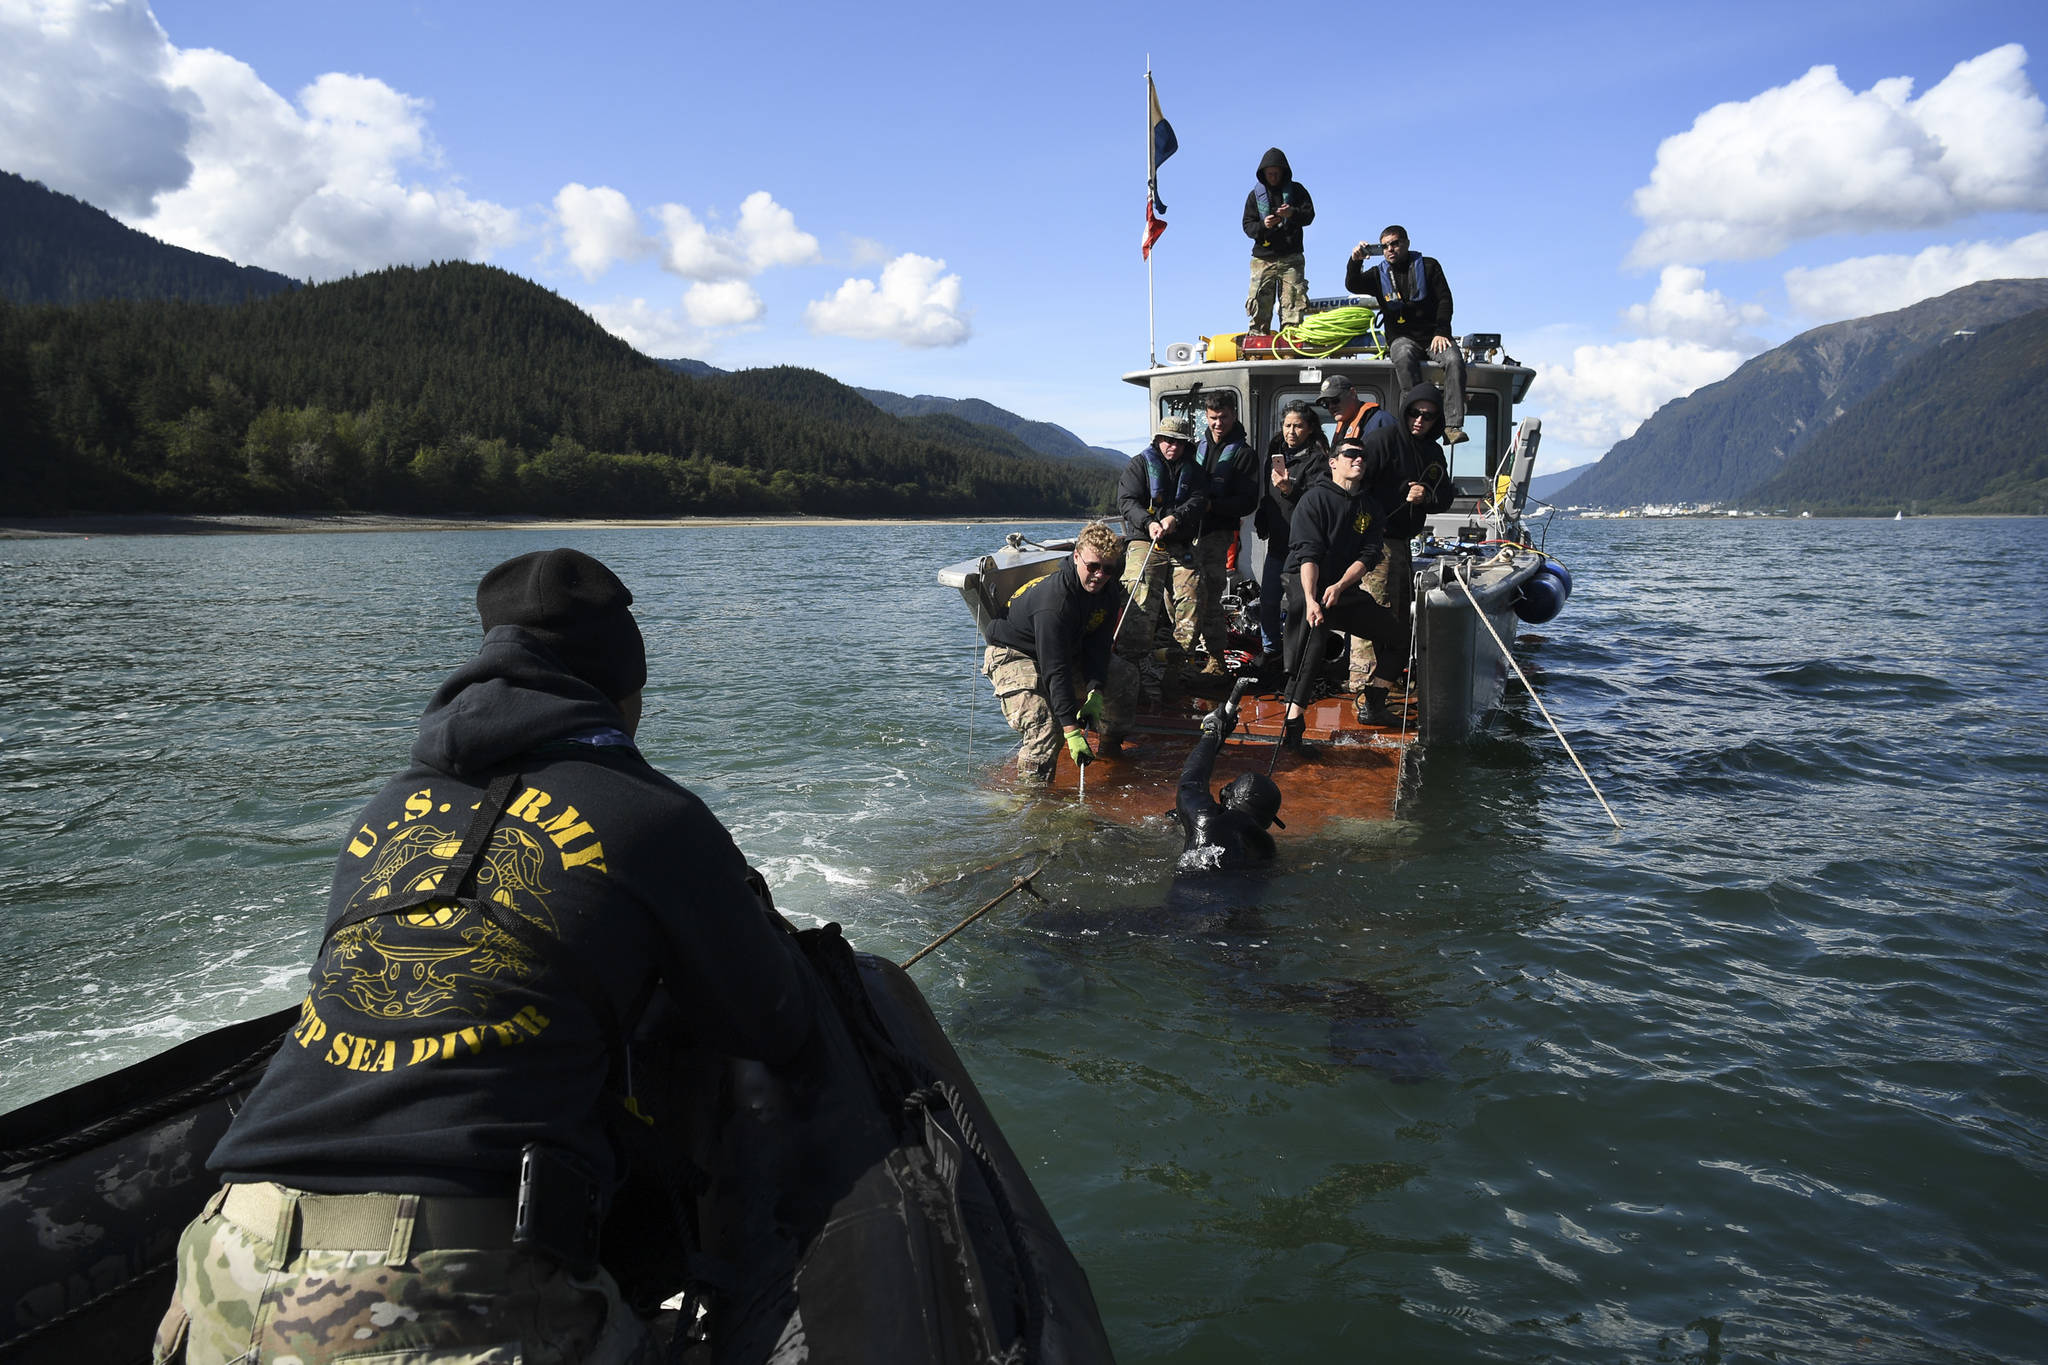 Members of the Army’s 74th Engineer Dive Detachment work off a Juneau Harbormaster boat to pull up a lost commercial crab pot in Gastineau Channel for the Douglas Indian Association/NOAA Marine Debris Project on Thursday, Sept. 5, 2019. The project aims to identify and remove derelict crab pots and their continued negative impact on wildlife and the environment. (Michael Penn | Juneau Empire)